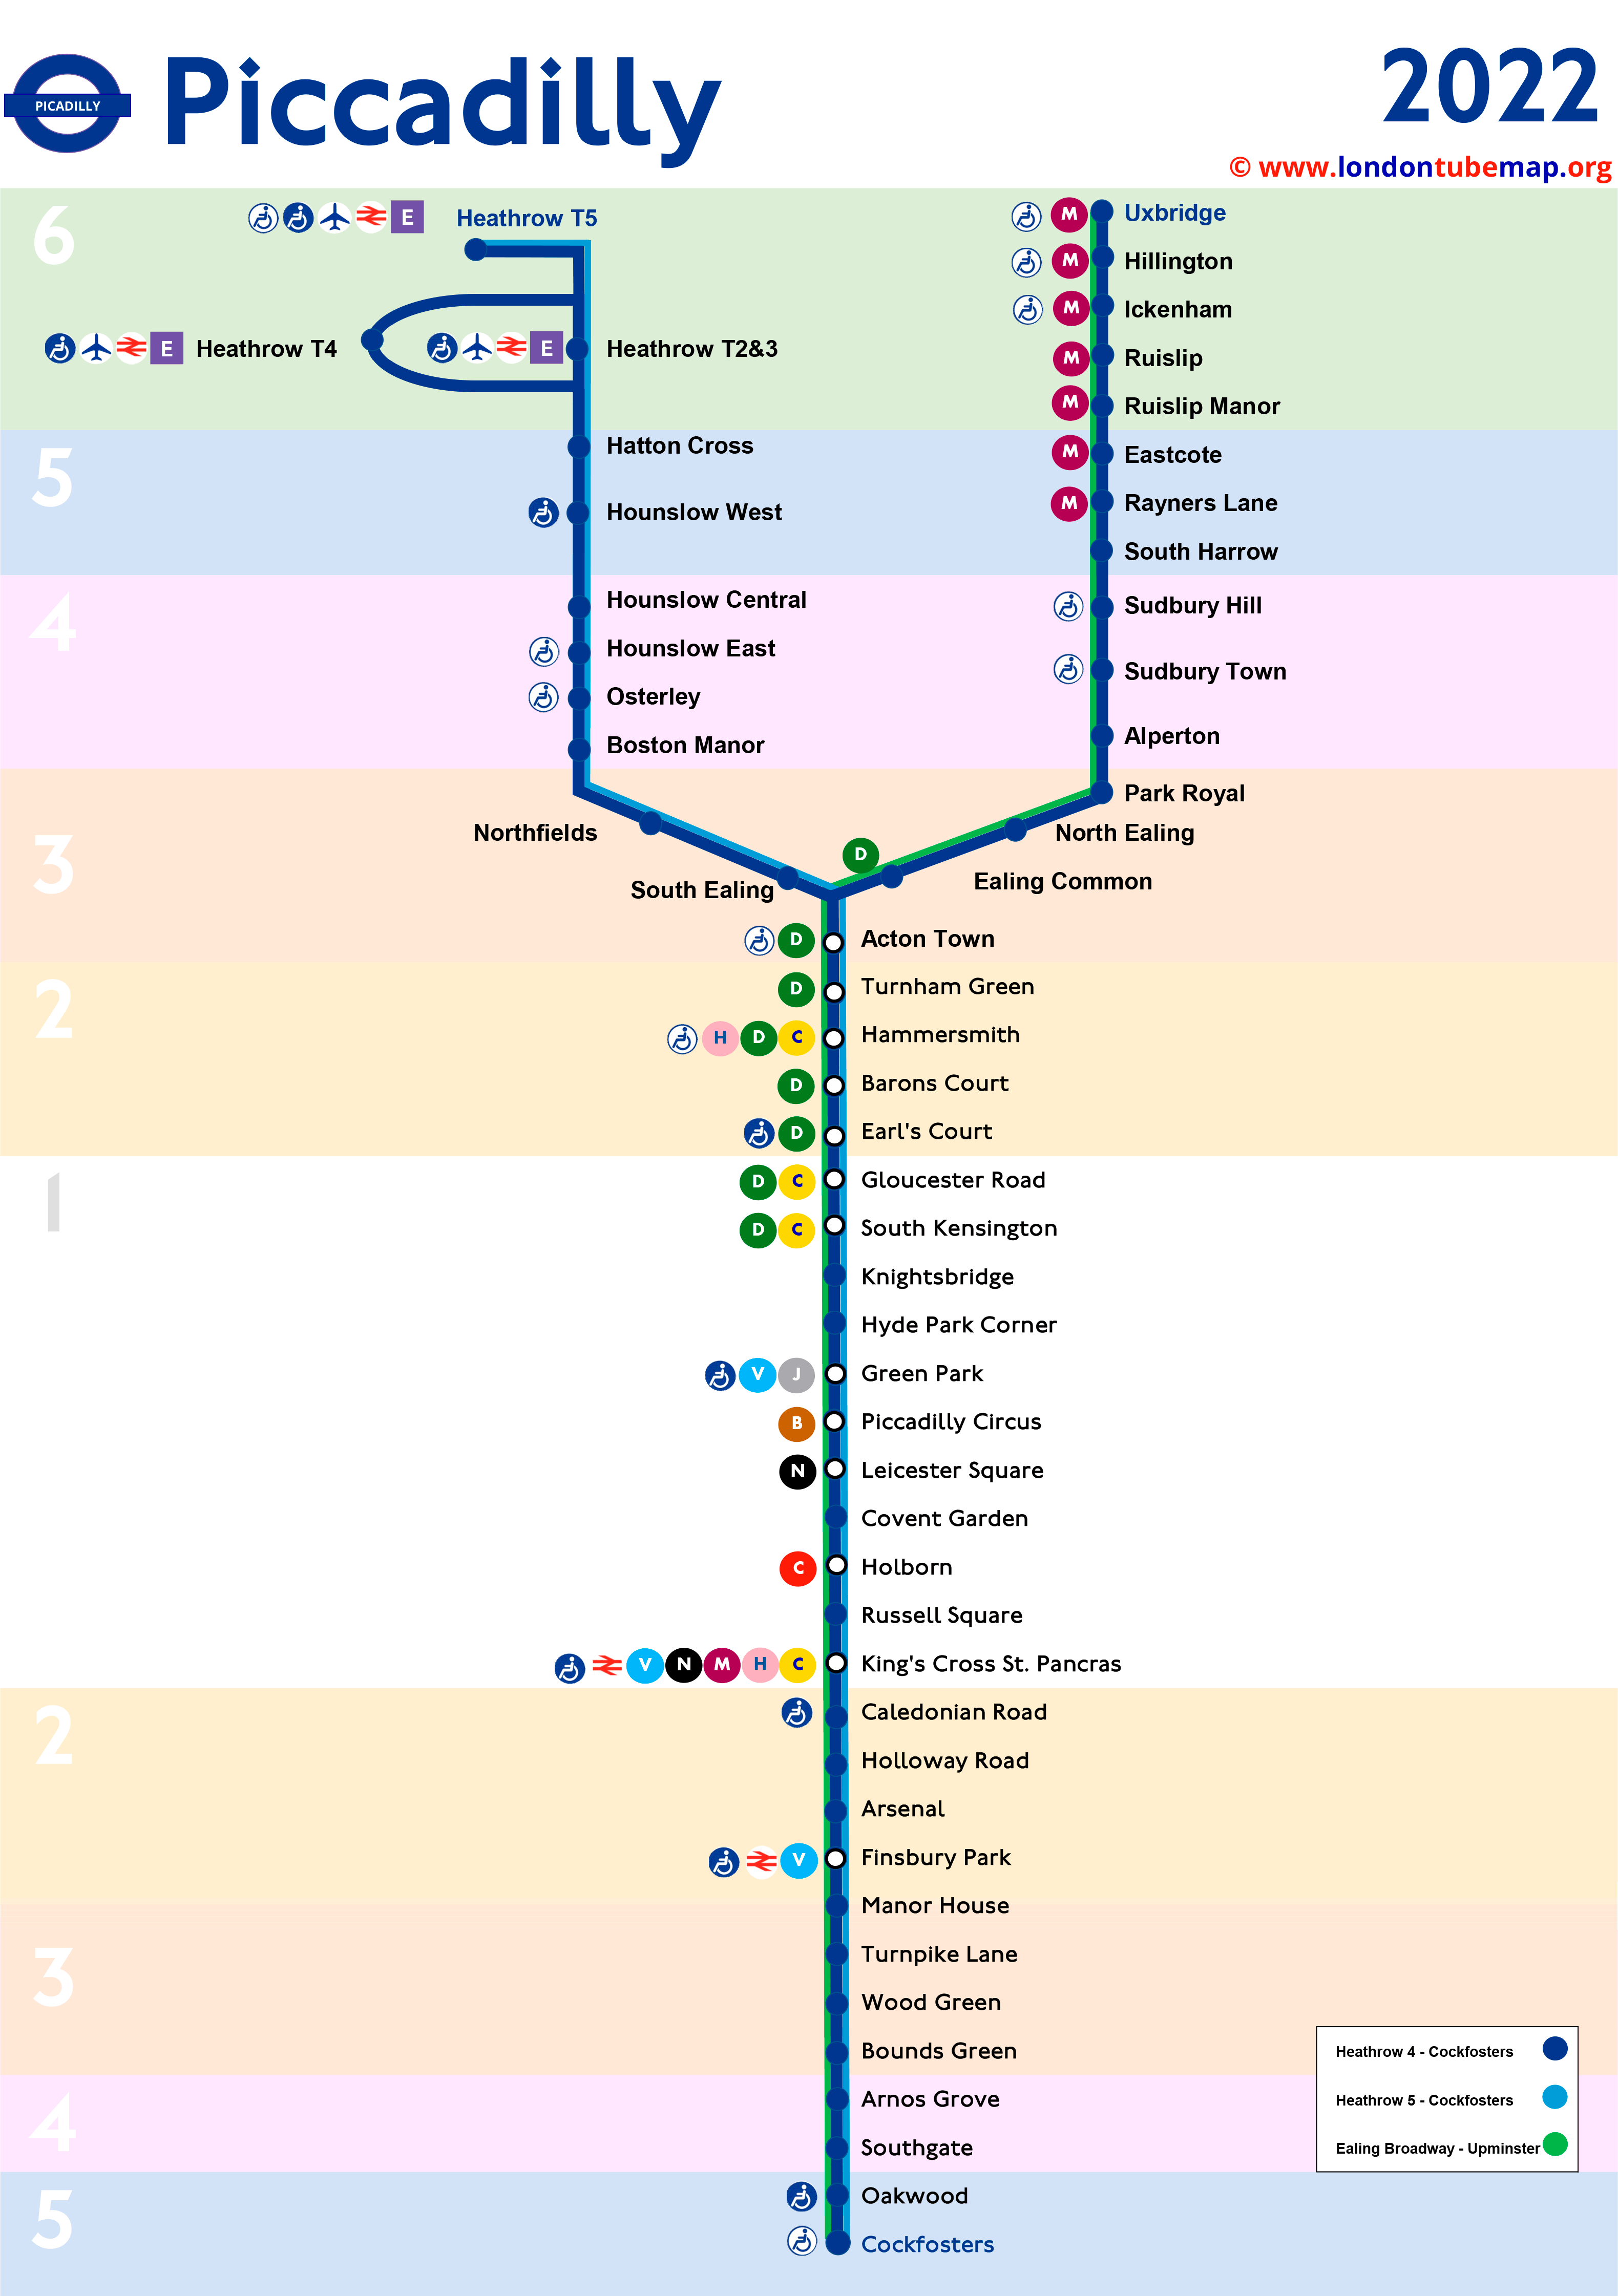 Piccadilly tube line map 2022